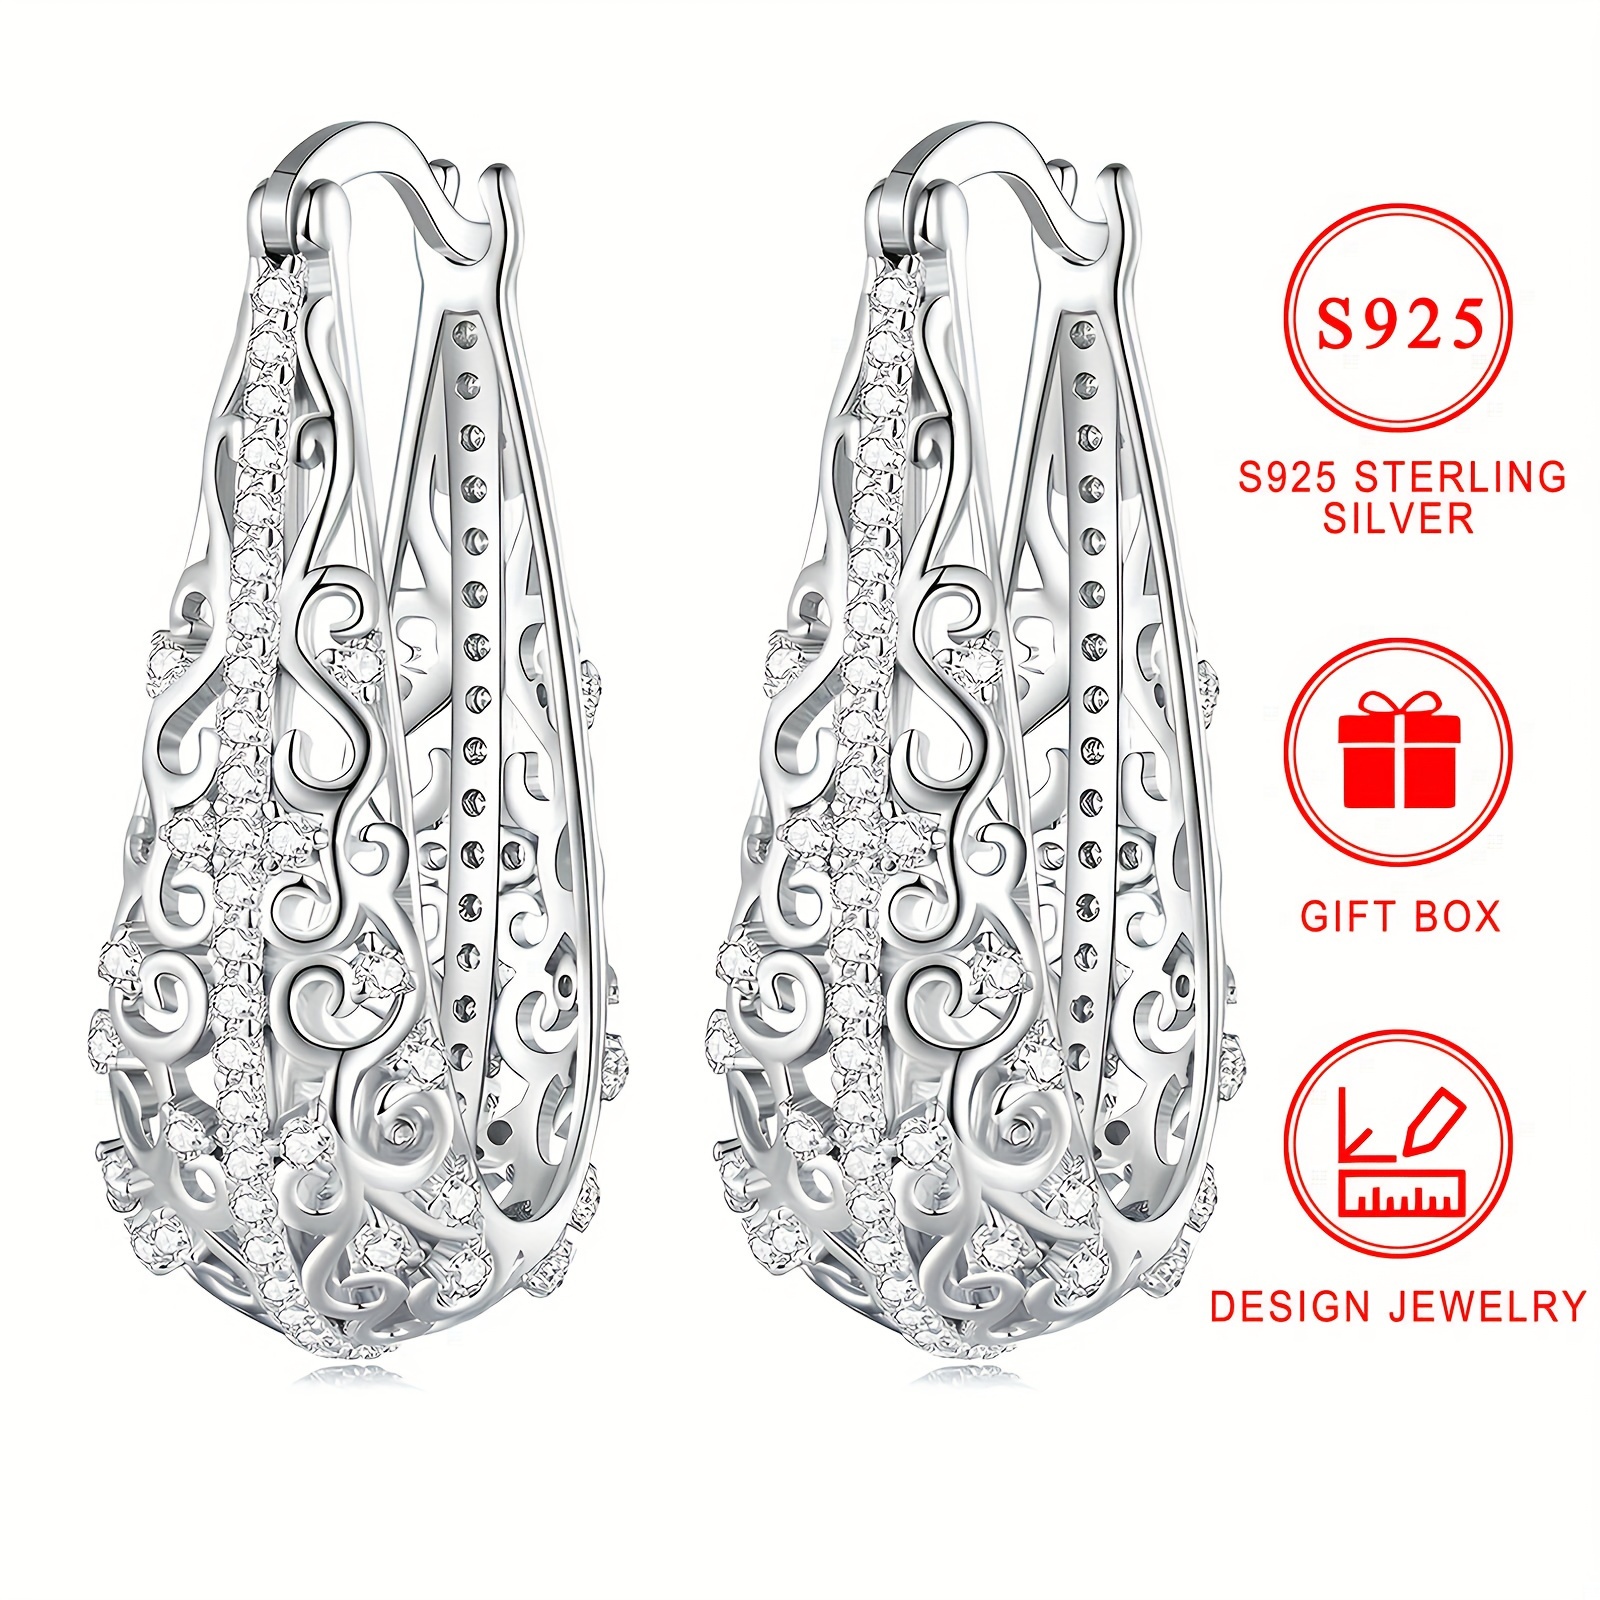 

Elegant Vintage Style 925 Sterling Silver Earrings, Hypoallergenic Plated, Women's Zirconia Floral Pattern, Luxurious Fashion Jewelry Gift, Pair With Gift Box